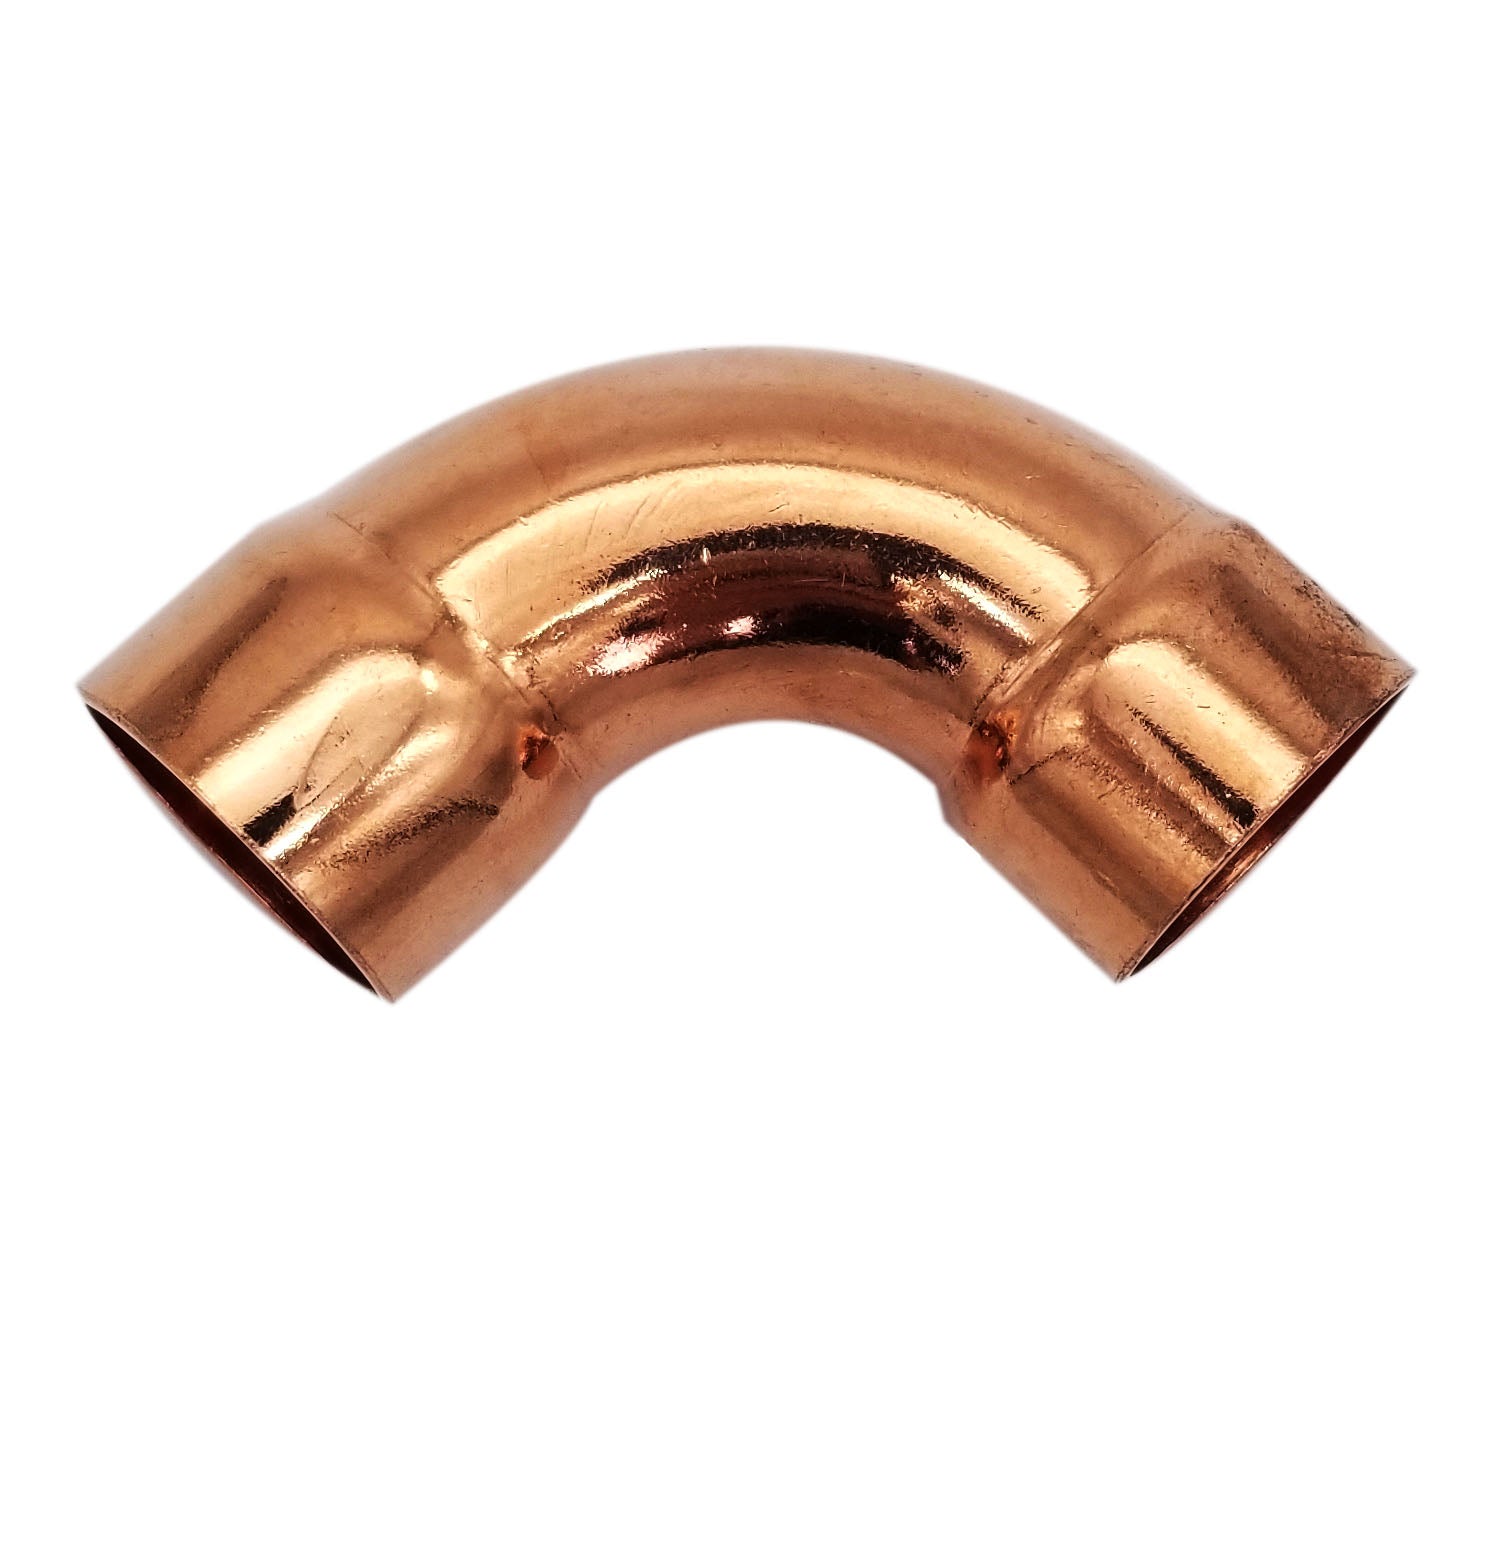 7/8 Inch (HVAC Outer Dimension) 3/4 Inch (Plumbing Inner Dimension) - Copper Long Radius 90° Elbow Fitting with 2 Solder Cups For Plumbing & HVAC – 99.9% Pure Copper - 10 Pack